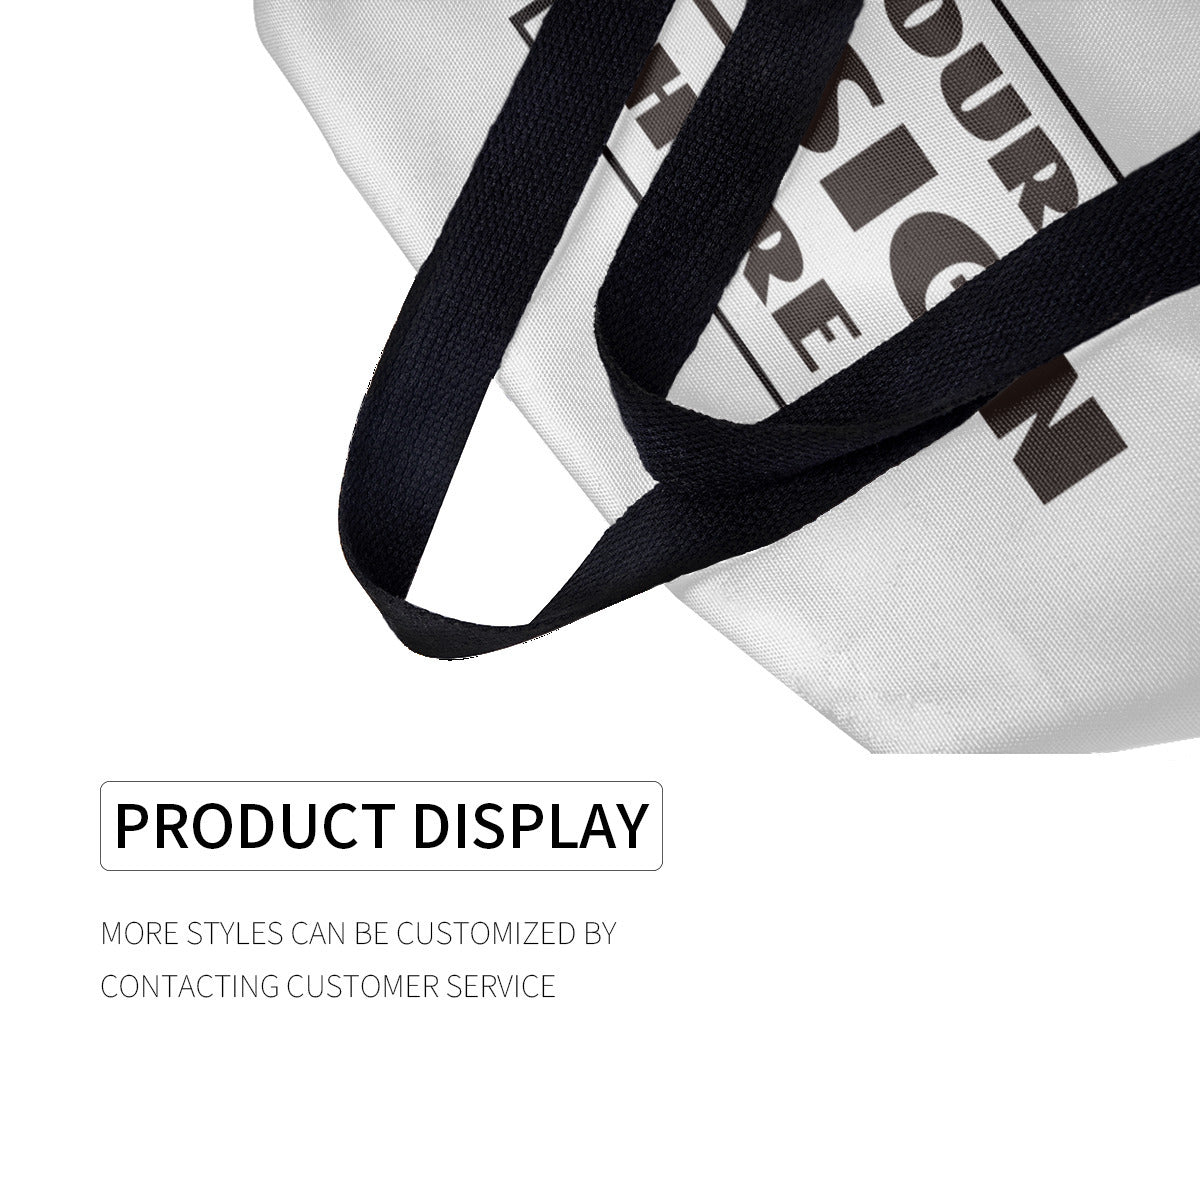 Product display, more styles can be customised by contacting customer service.